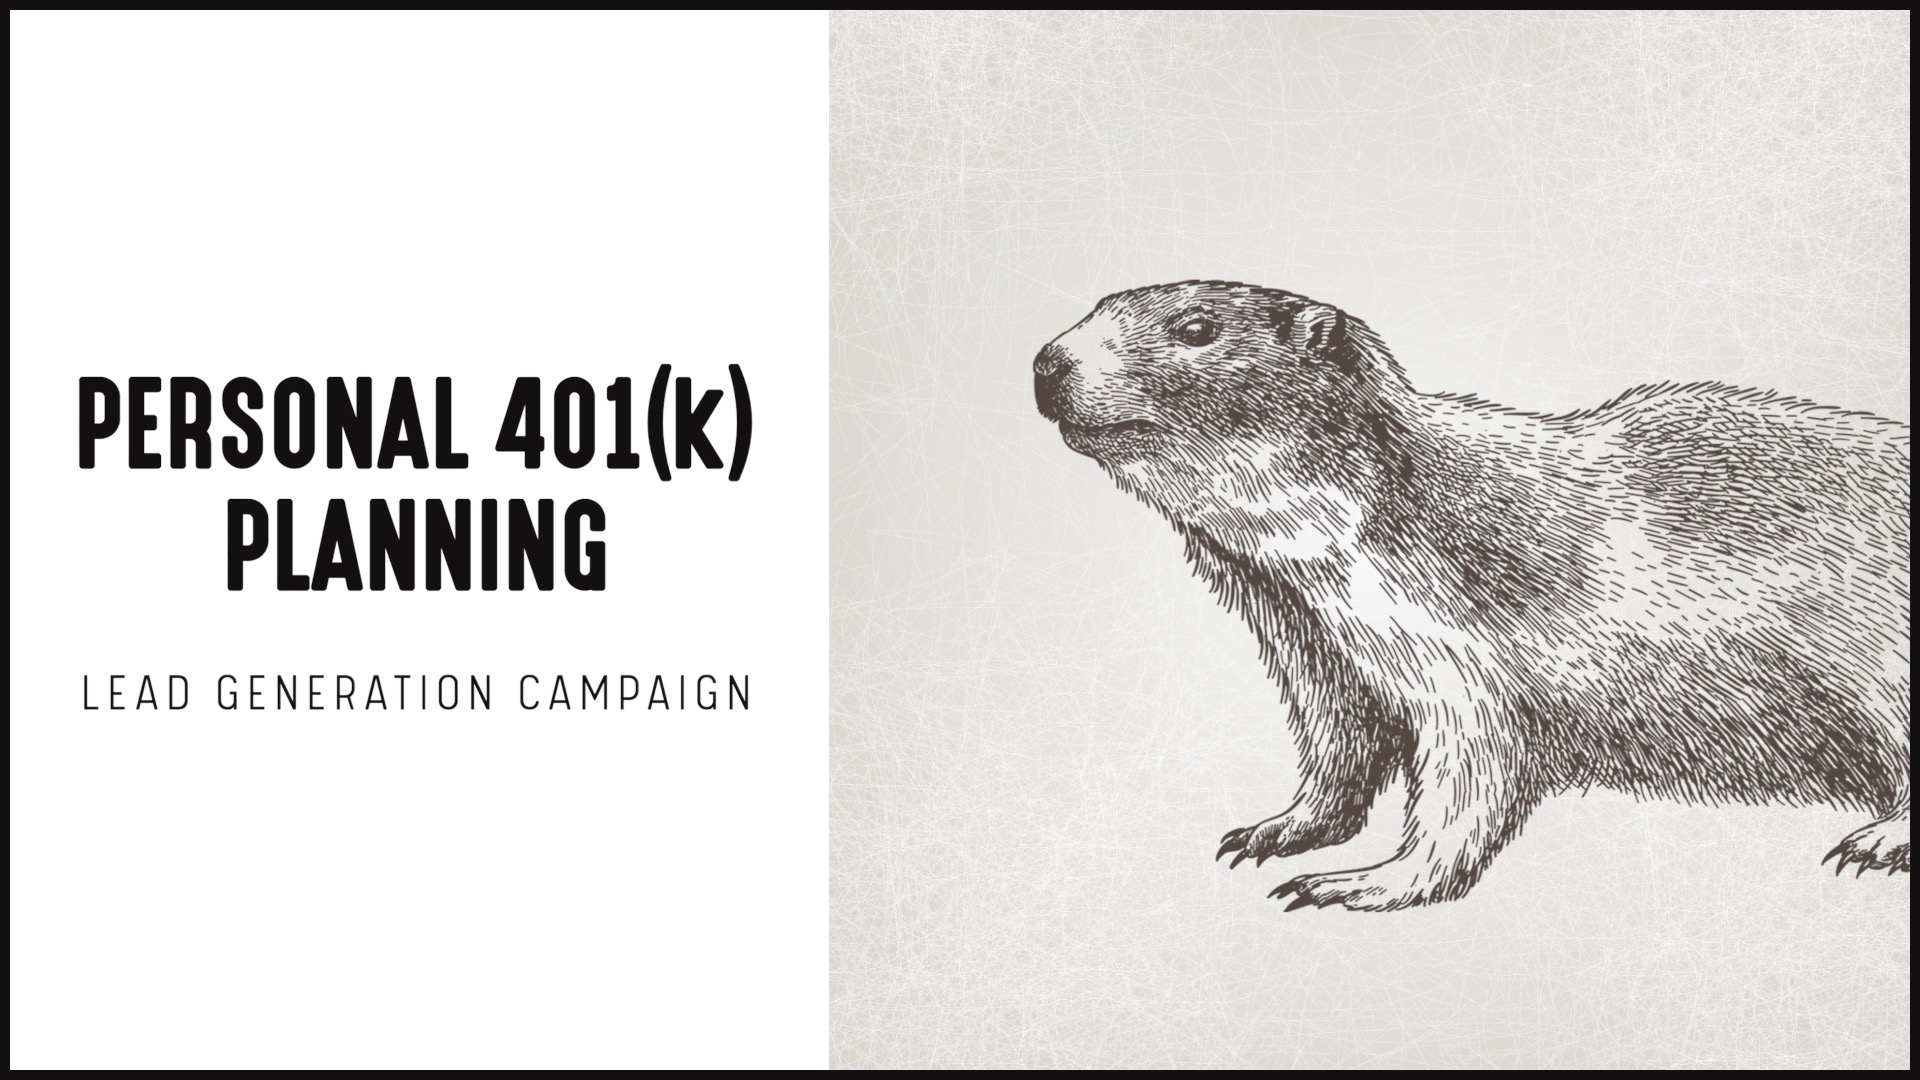 [NEW] Lead Gen Campaign | Personal 401(k) Planning